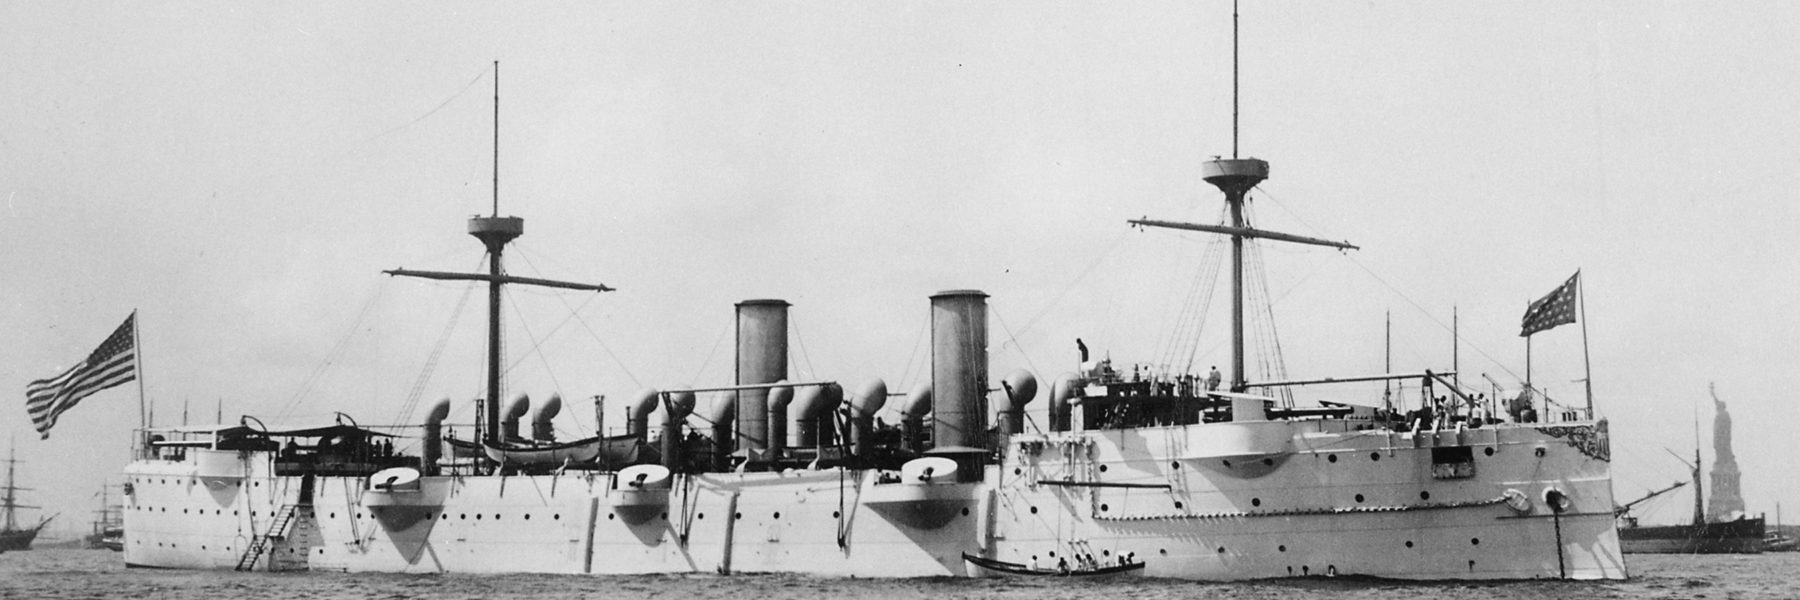 USS baltimore in New York - Statue of Liberty can be seen to the right in the foreground.